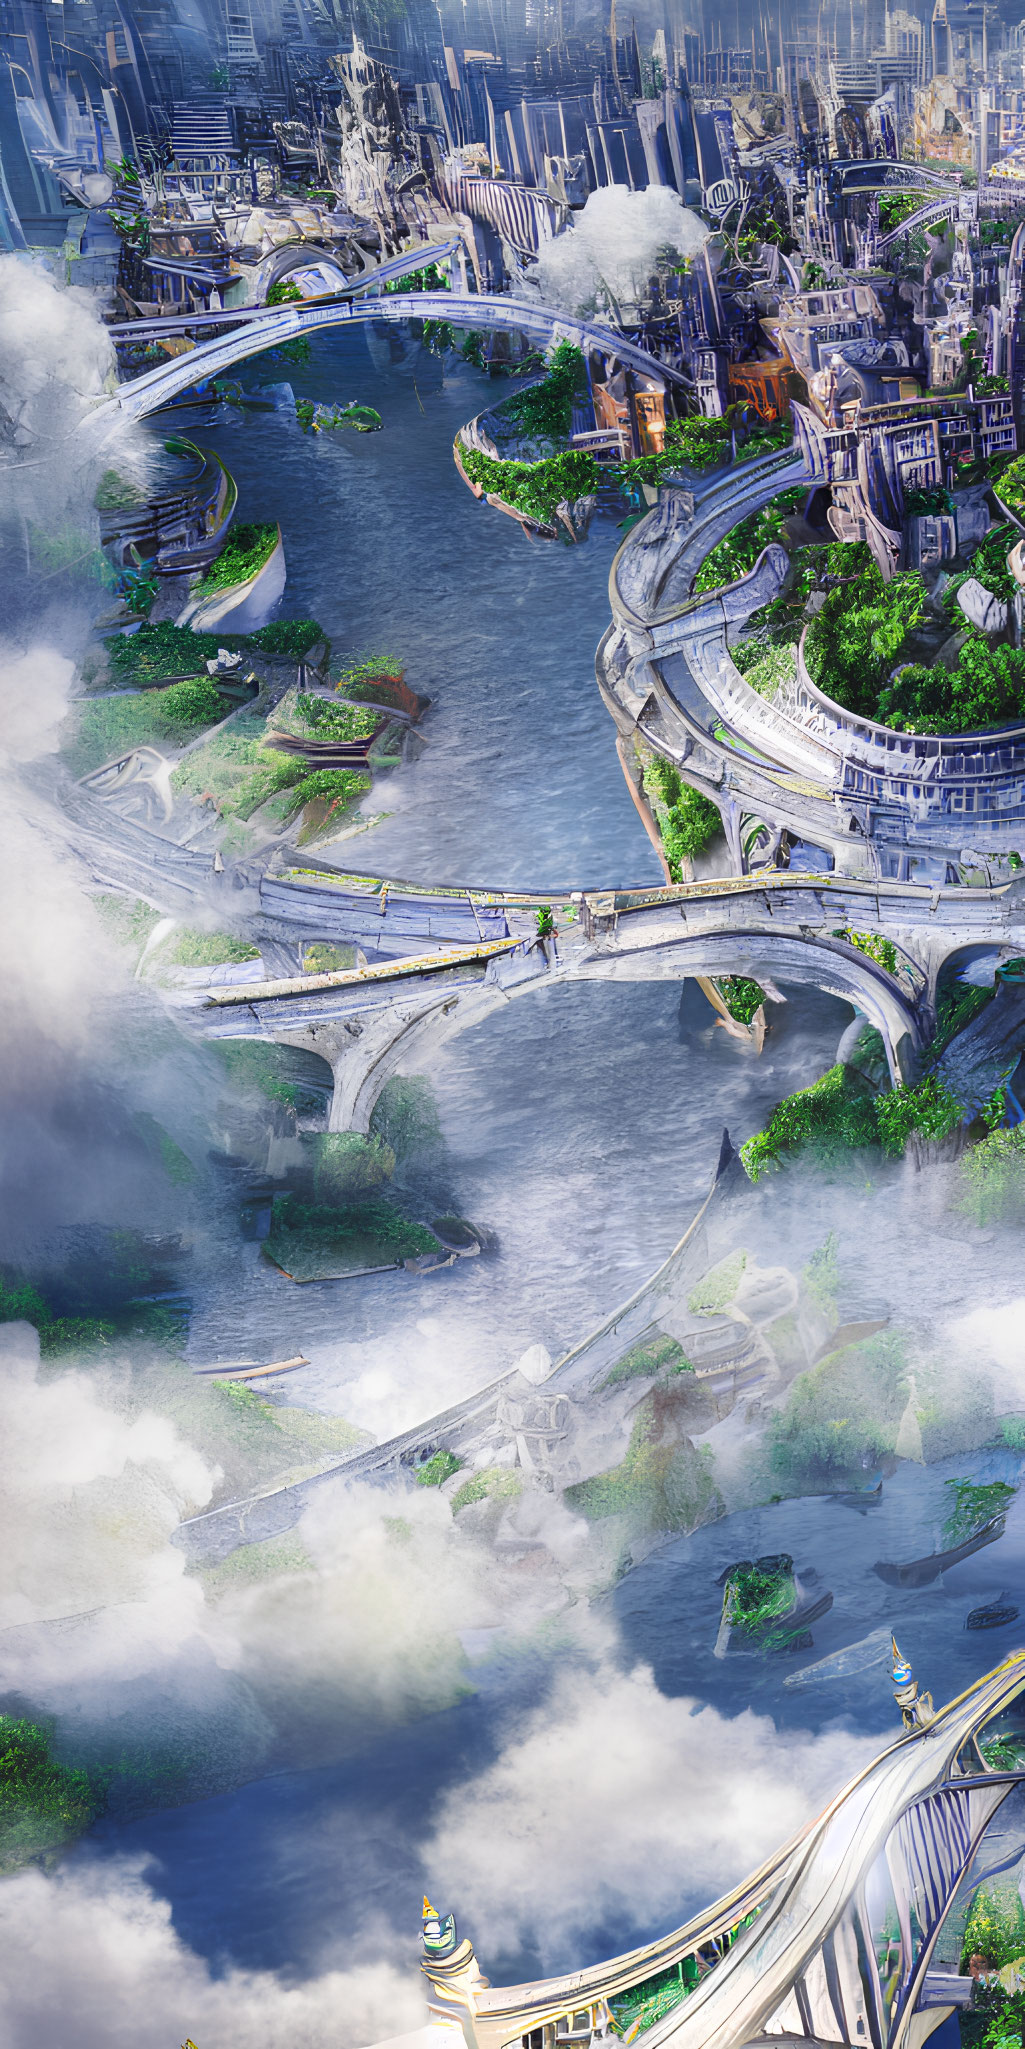 Futuristic cityscape with elevated roads, greenery, towering structures, and river under cloudy sky